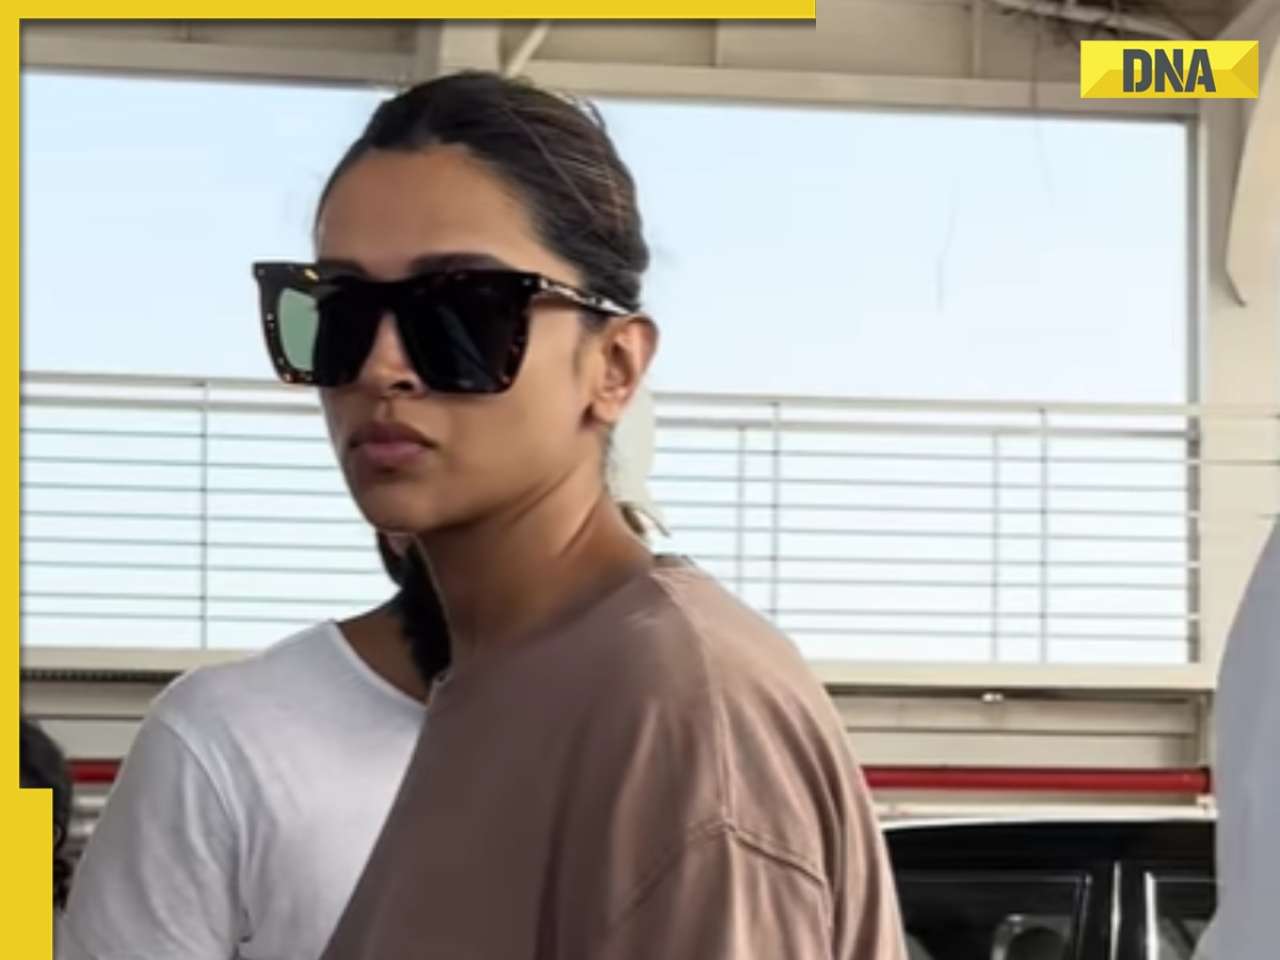 Watch: Pregnant Deepika Padukone reacts as fan spies on her at airport, netizens say 'leave her alone' 